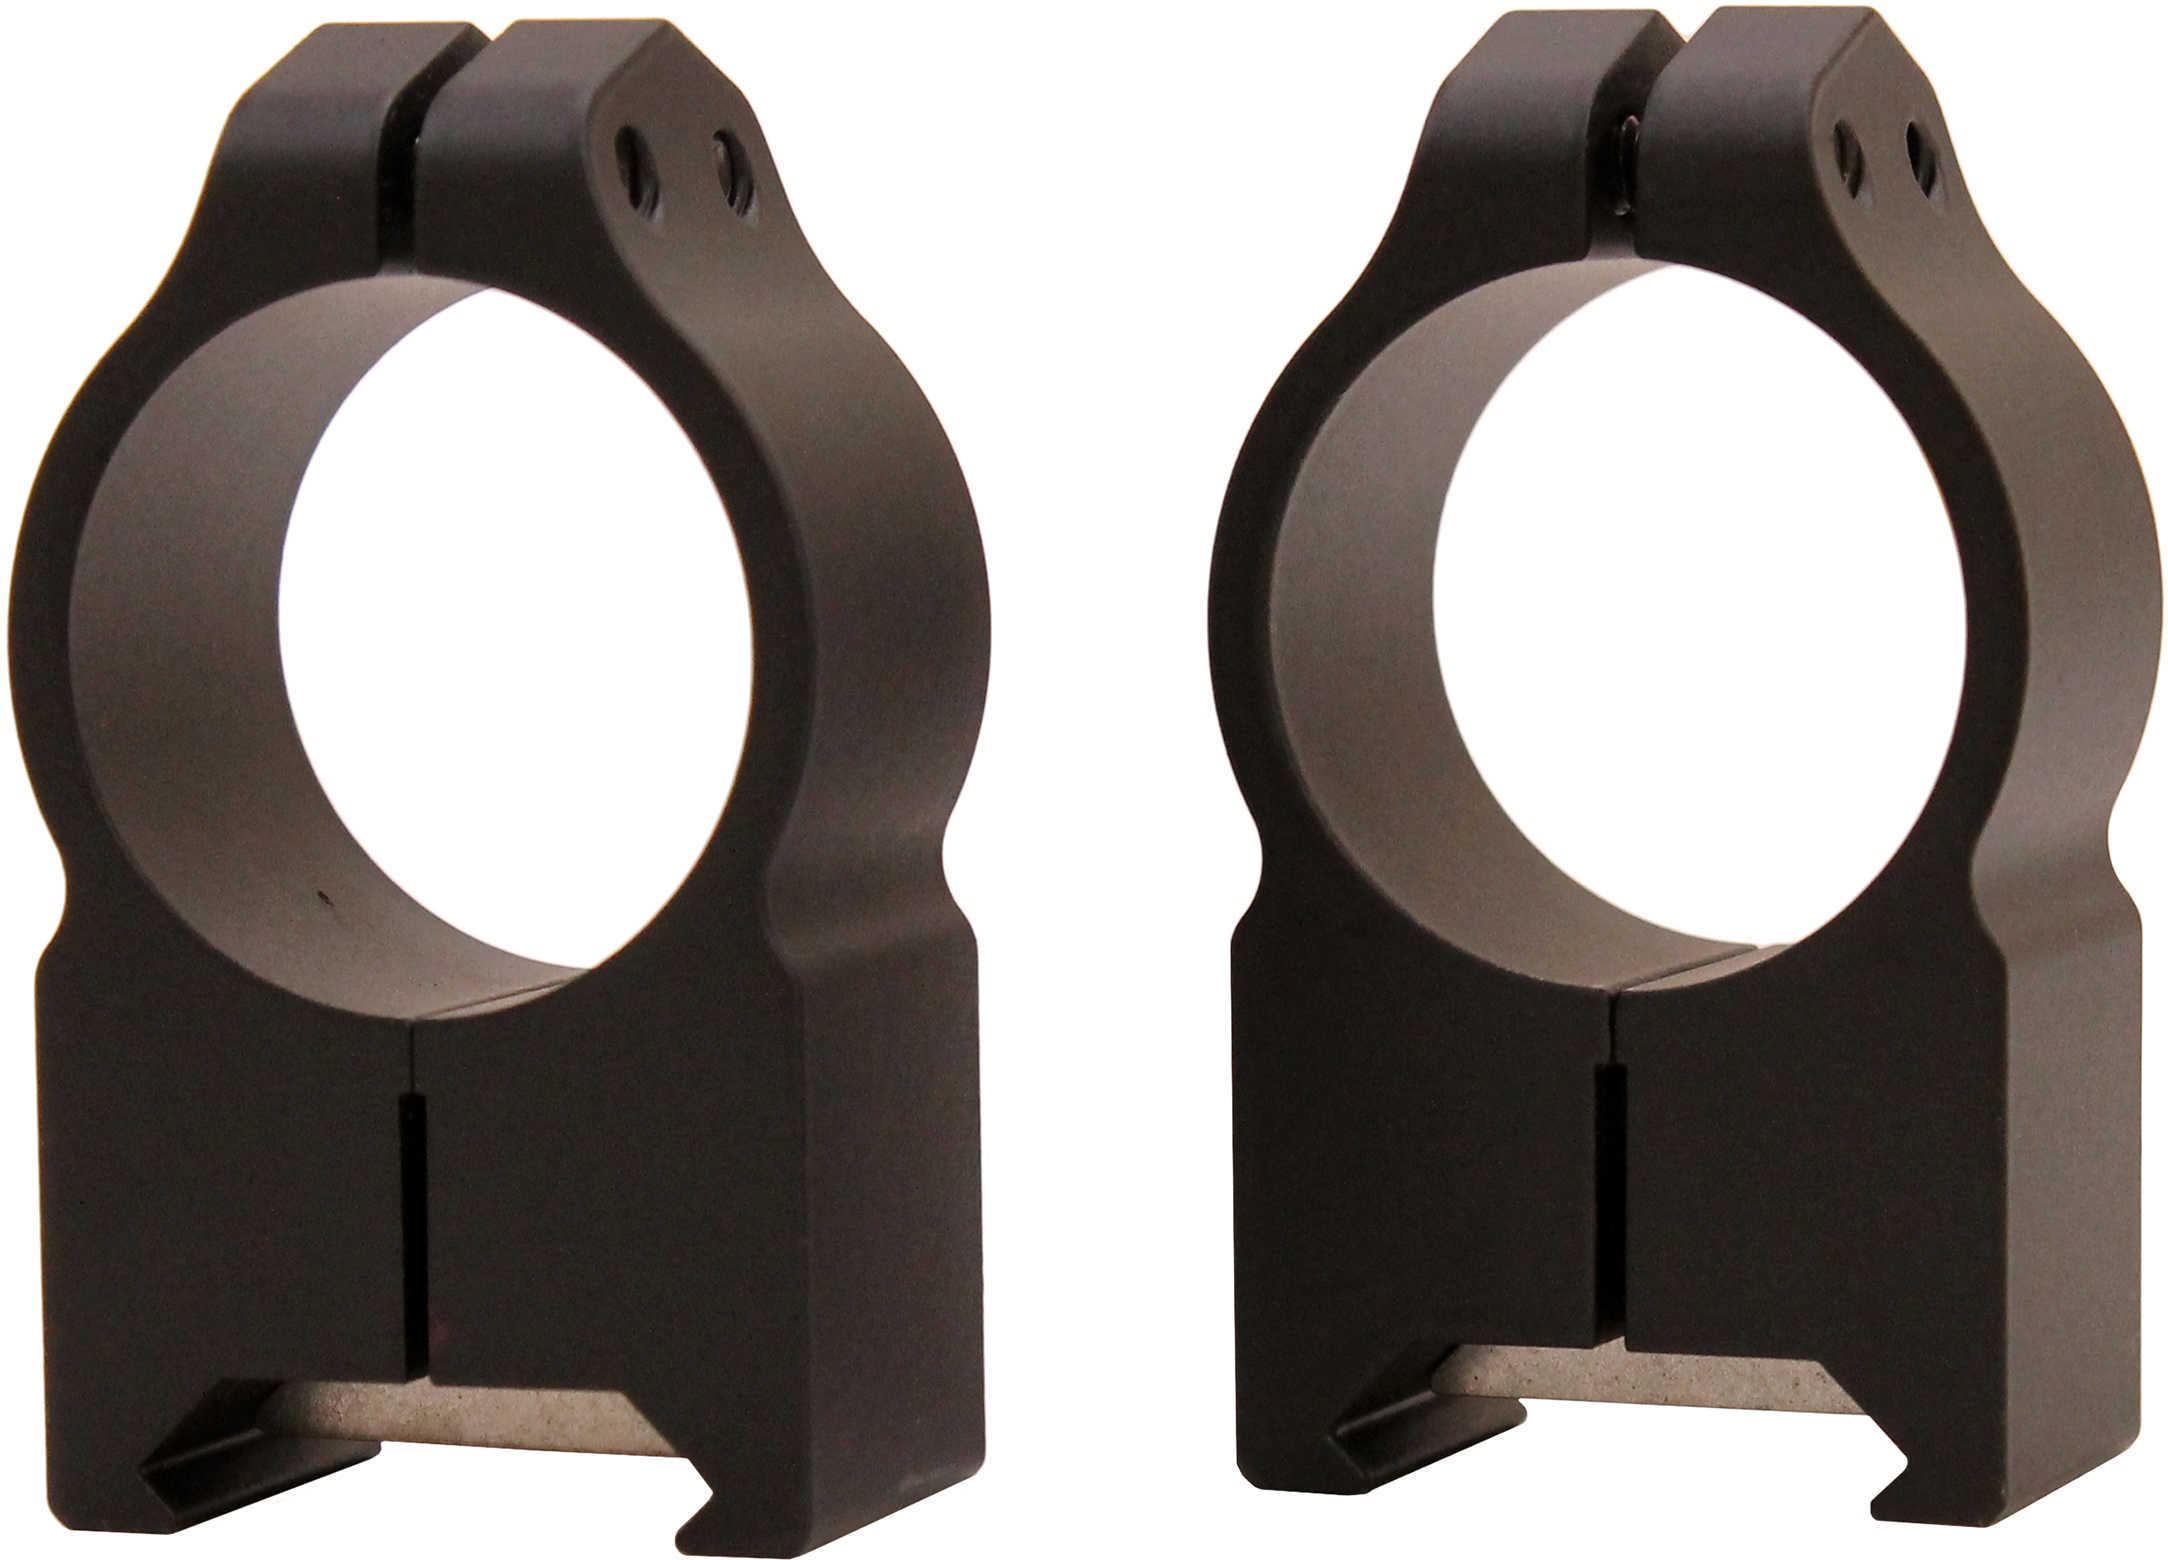 Warne 1" High Scope Rings With Matte Black Finish Md: 202M